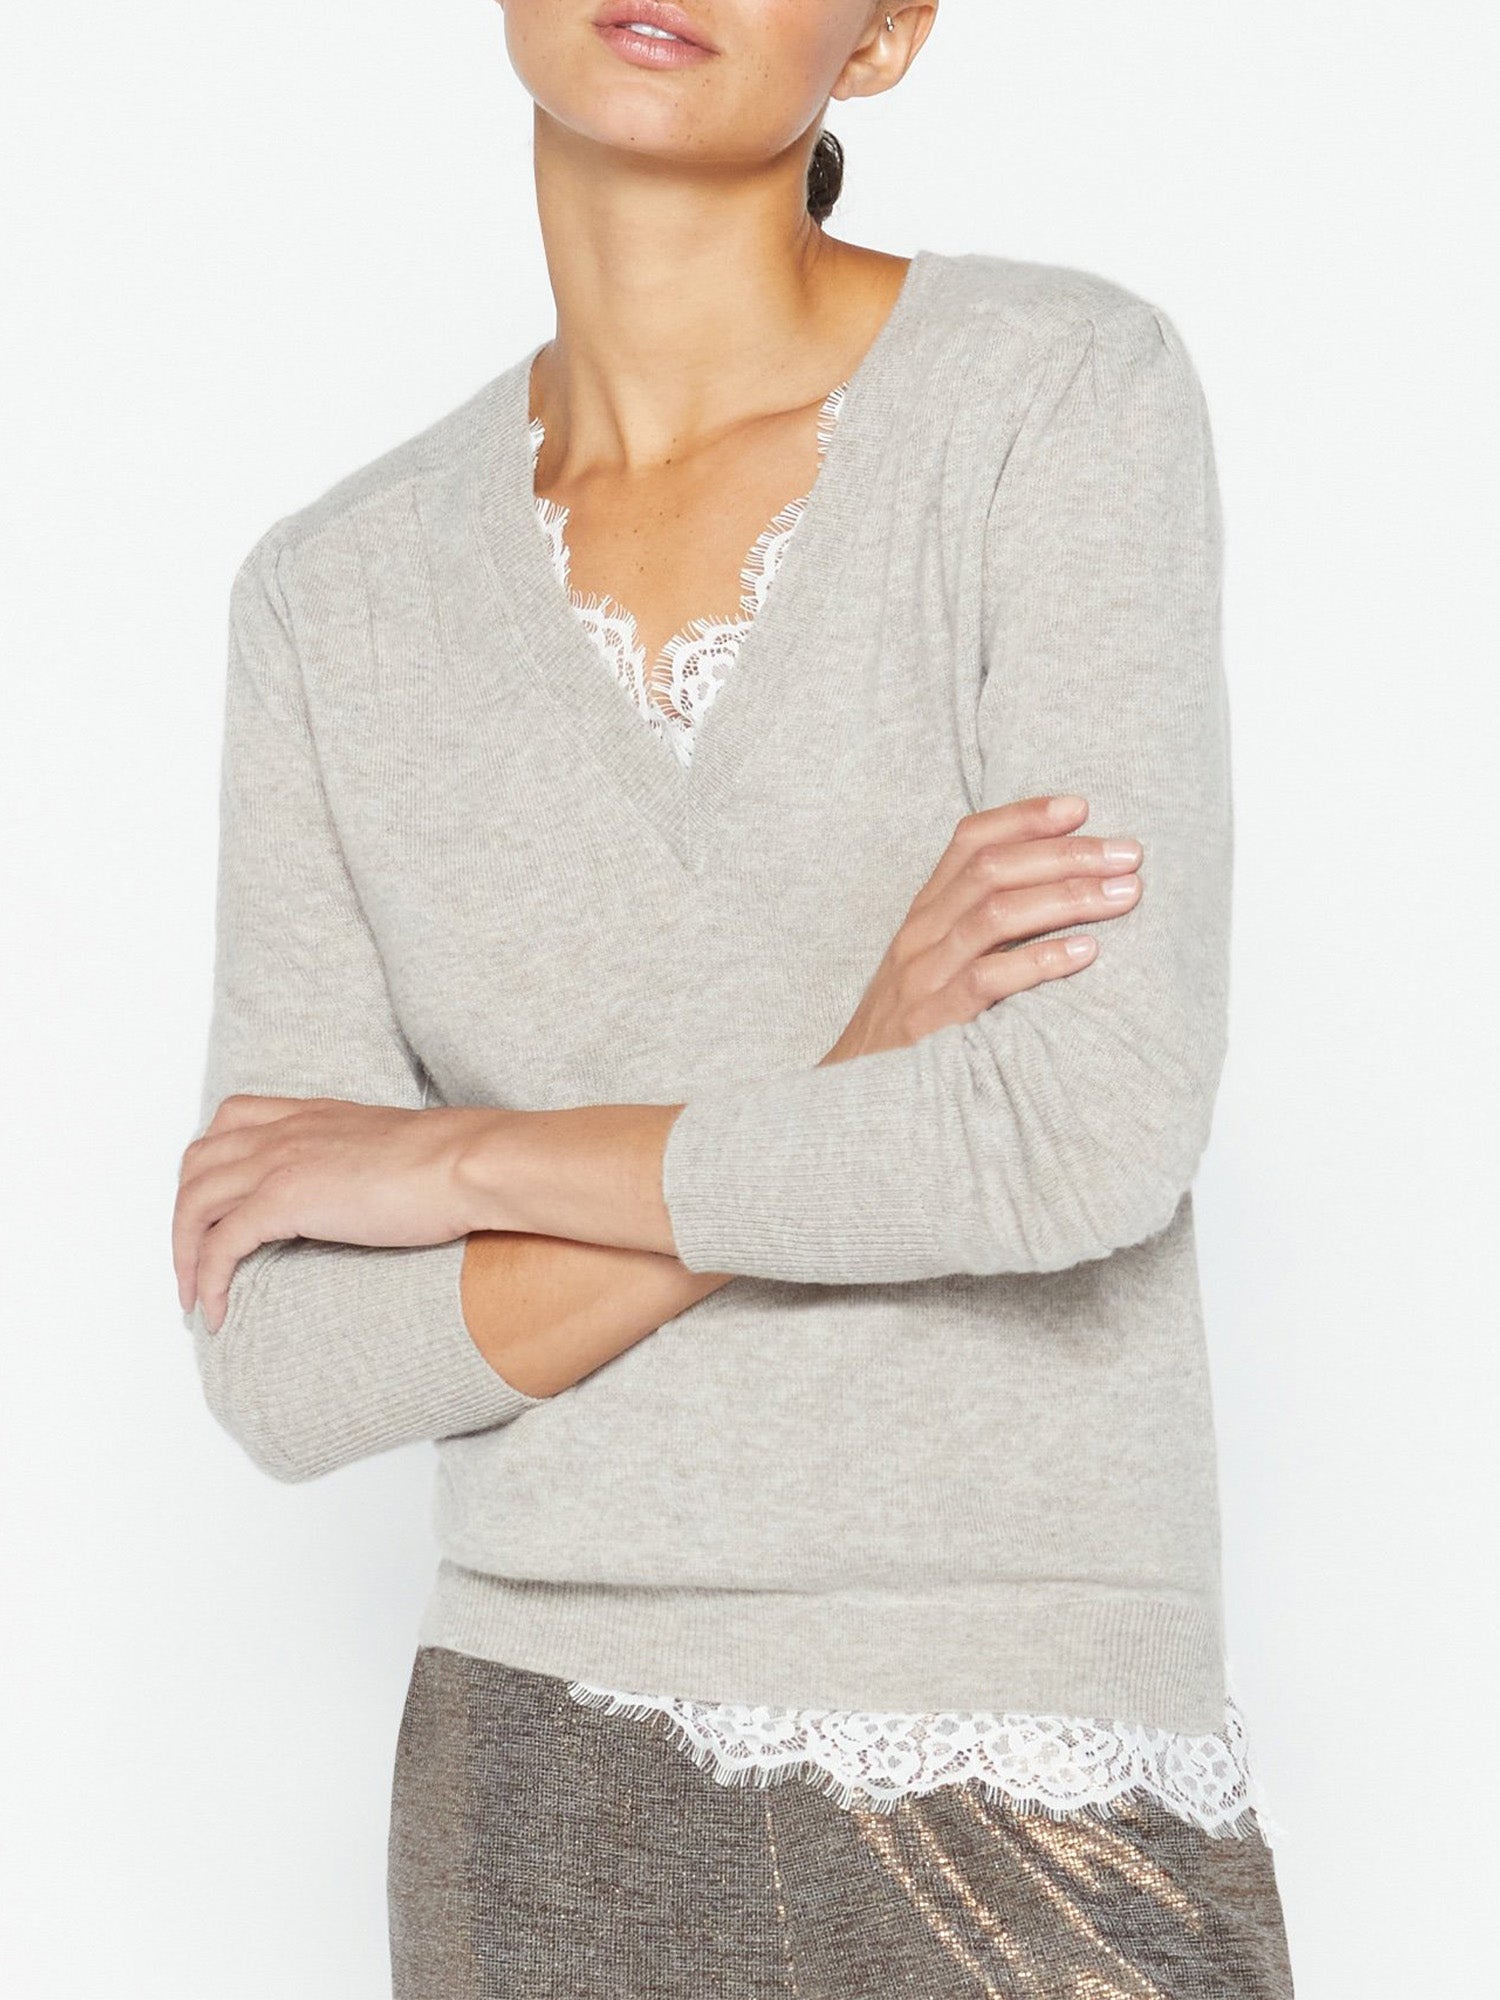 Marcella light grey lace layered v-neck sweater front view 2